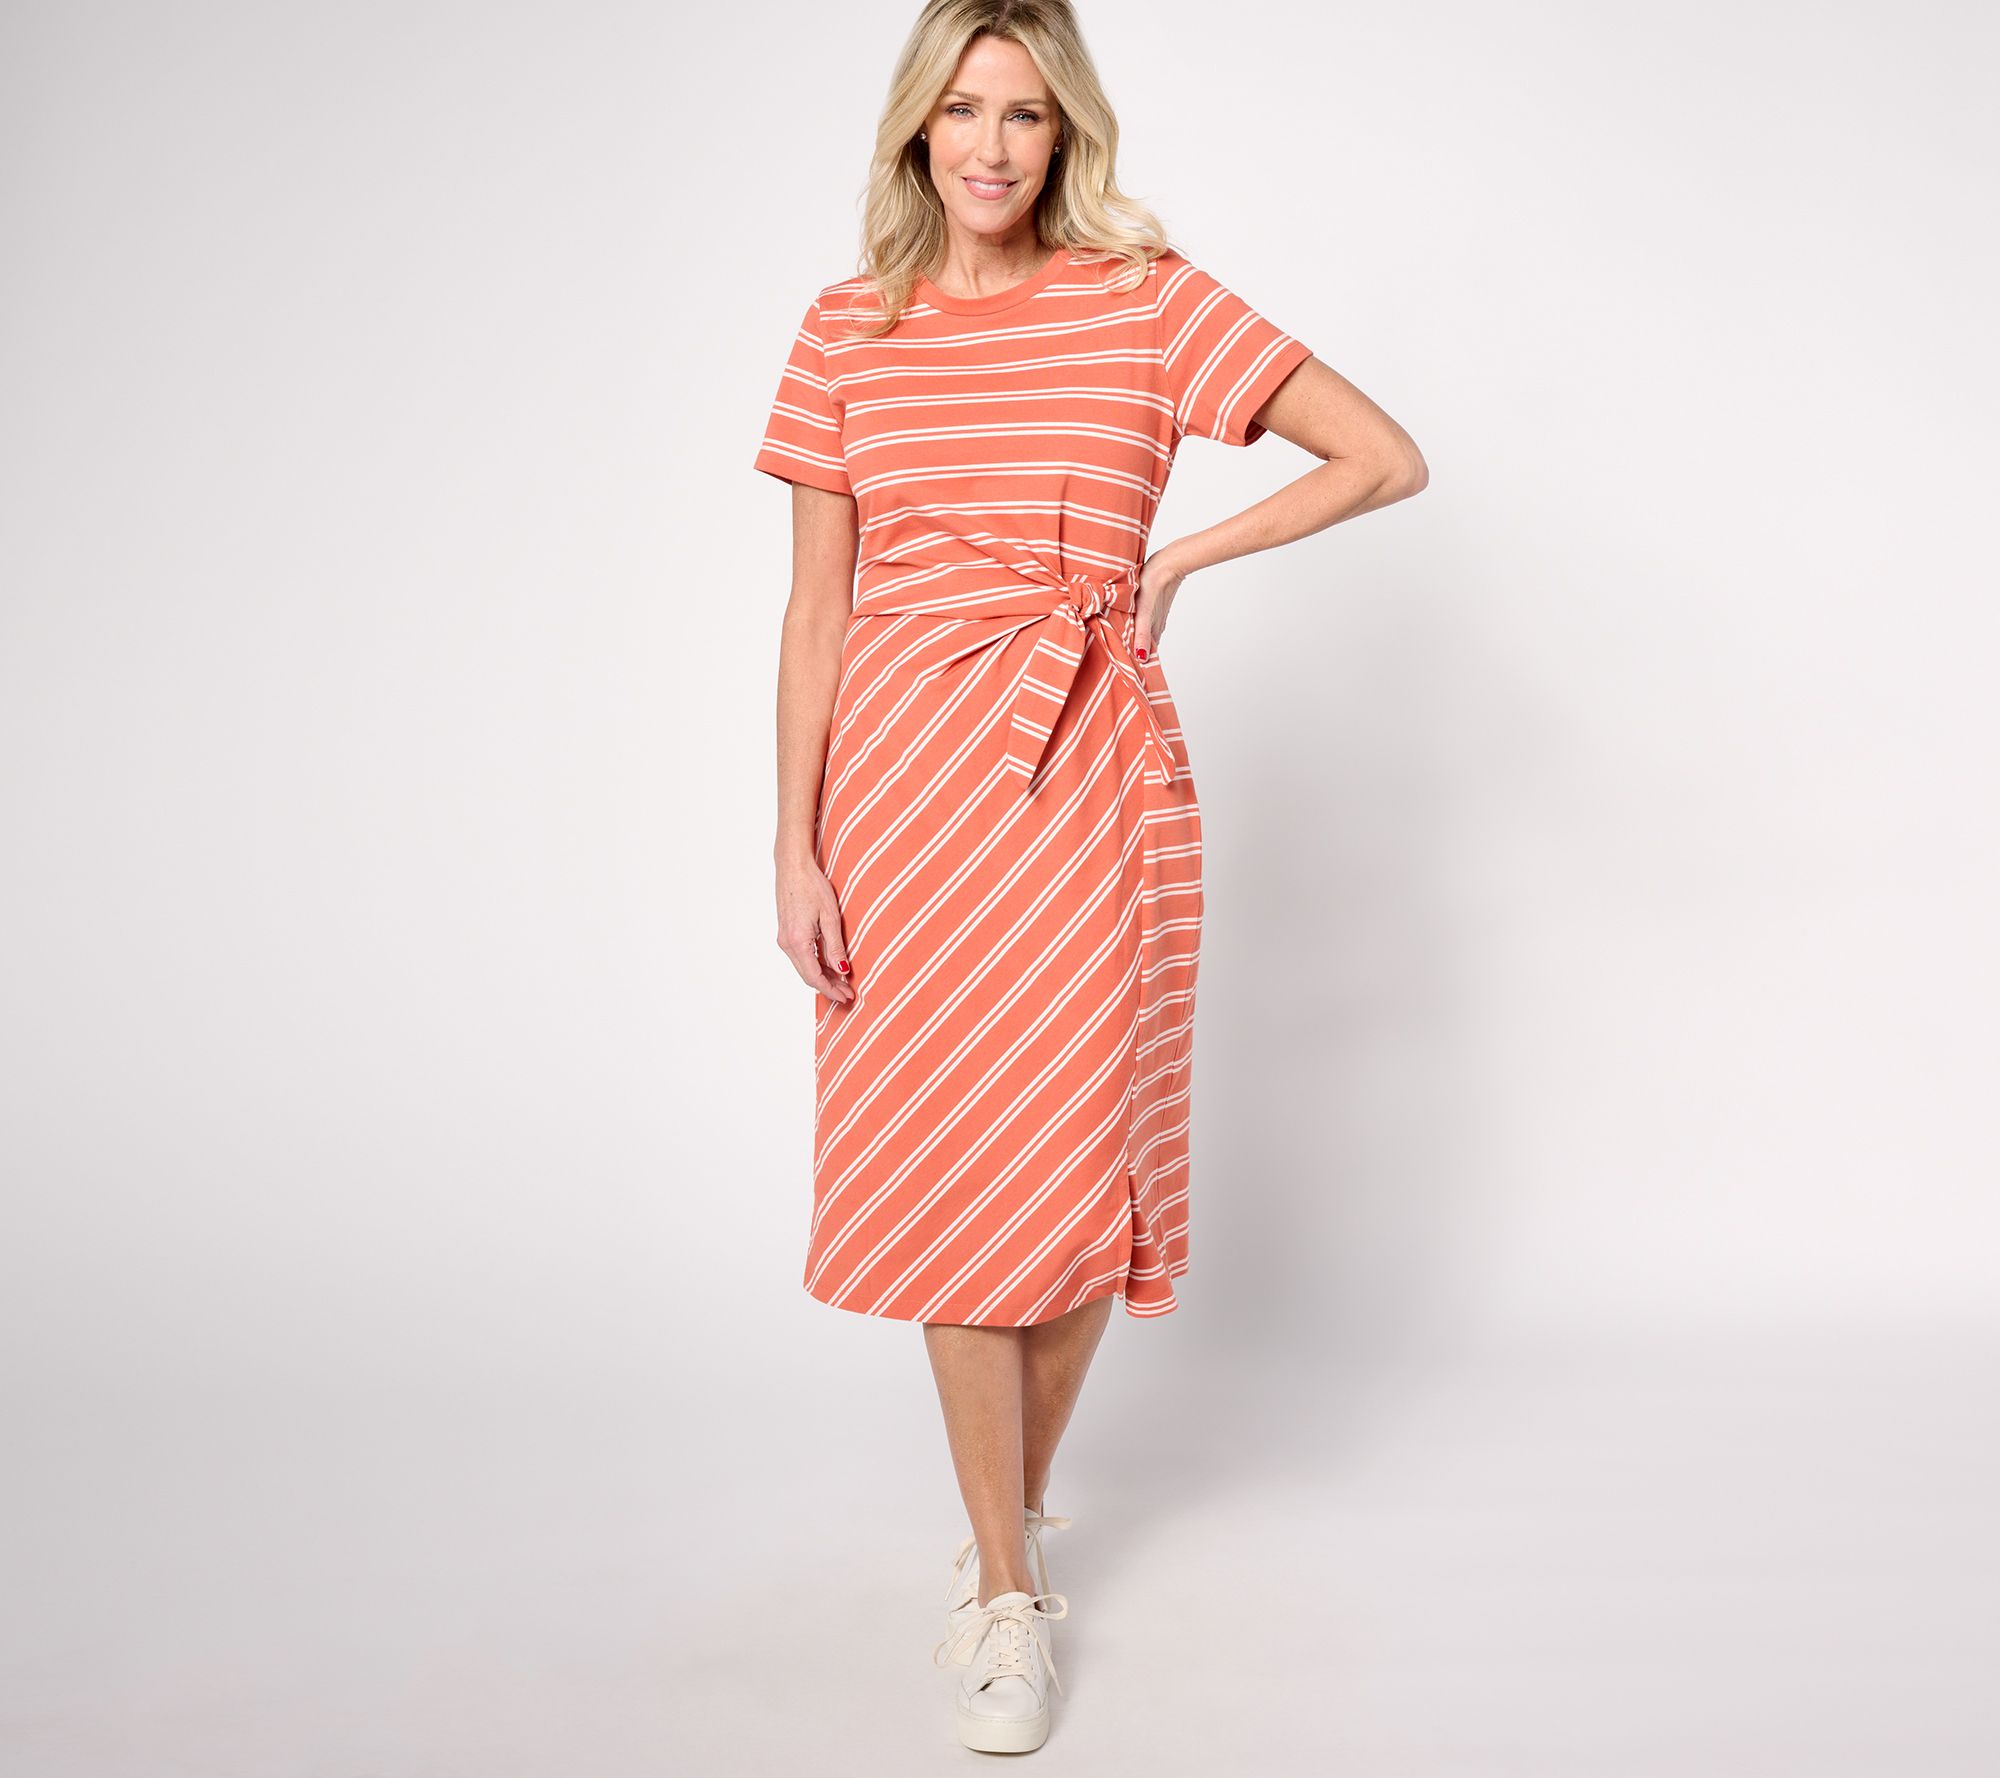 This 'Breezy' and 'Flattering' Spring Midi Dress Is Trending at